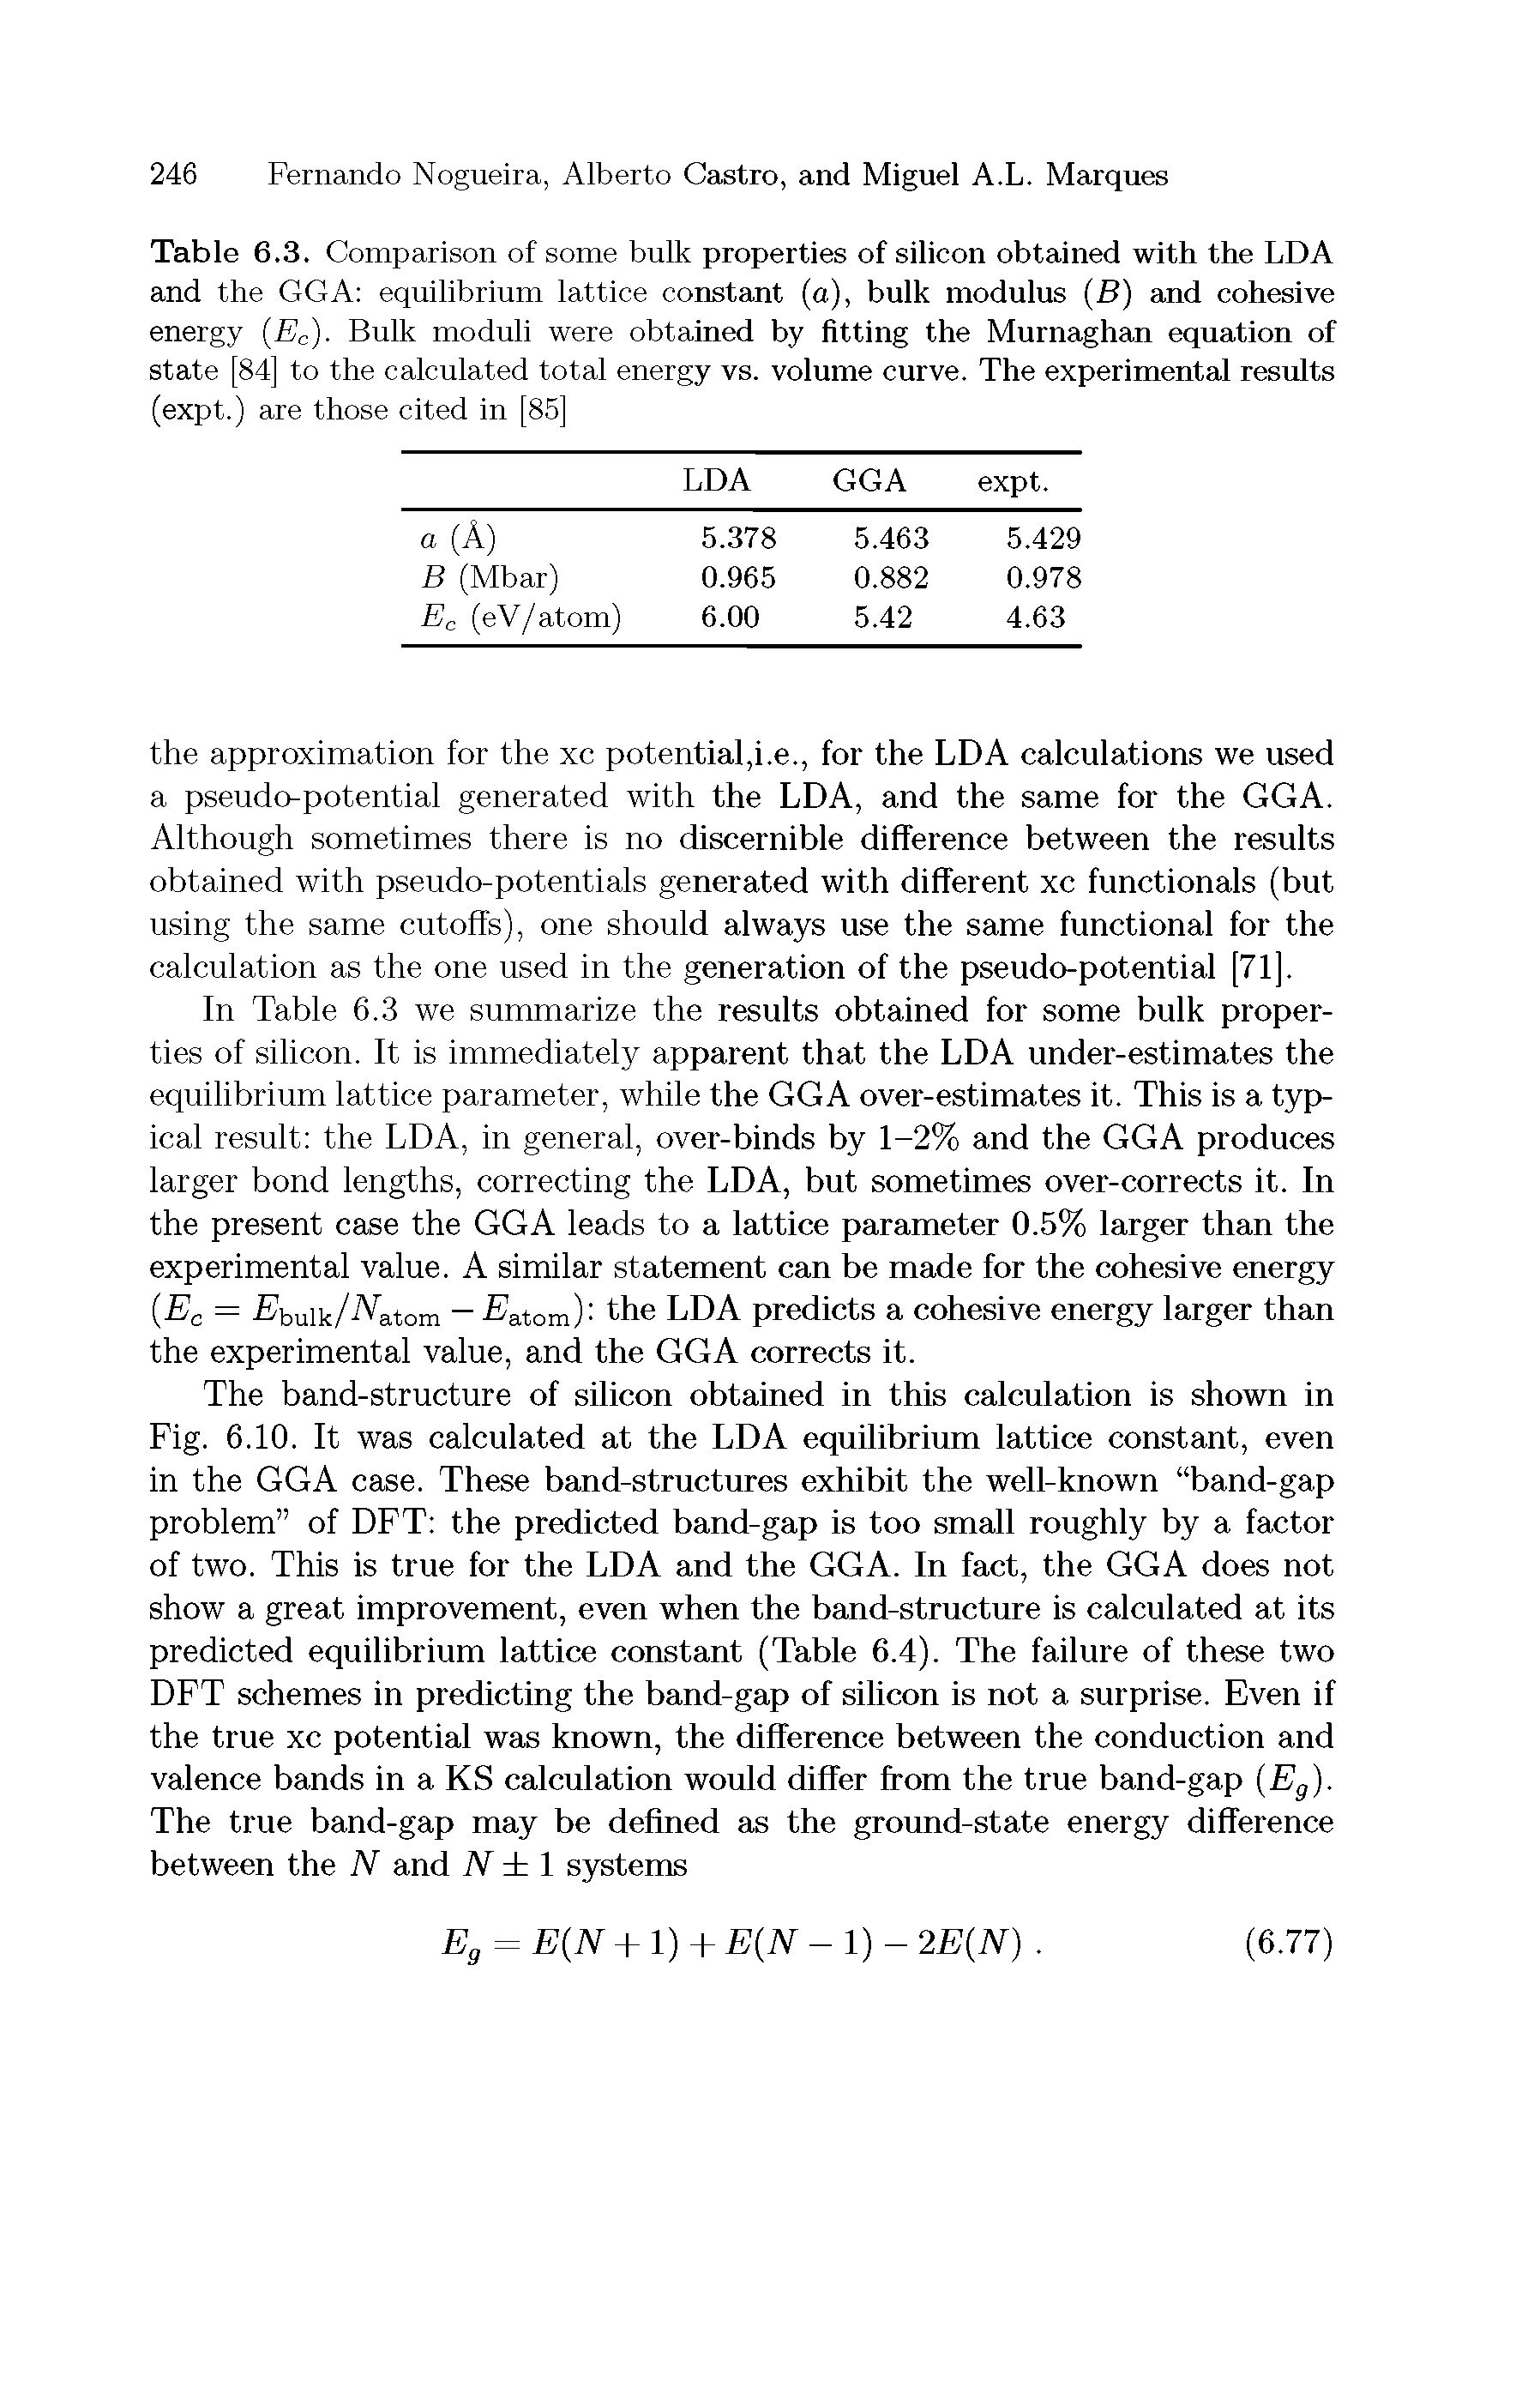 Table 6.3. Comparison of some bnlk properties of silicon obtained with the LDA and the GGA equilibrinm lattice constant (a), bulk modulus (B) and cohesive energy (Ec). Bnlk modnli were obtained by fitting the Murnaghan equation of state [84] to the calculated total energy vs. volume curve. The experimental results (expt.) are those cited in [85]...